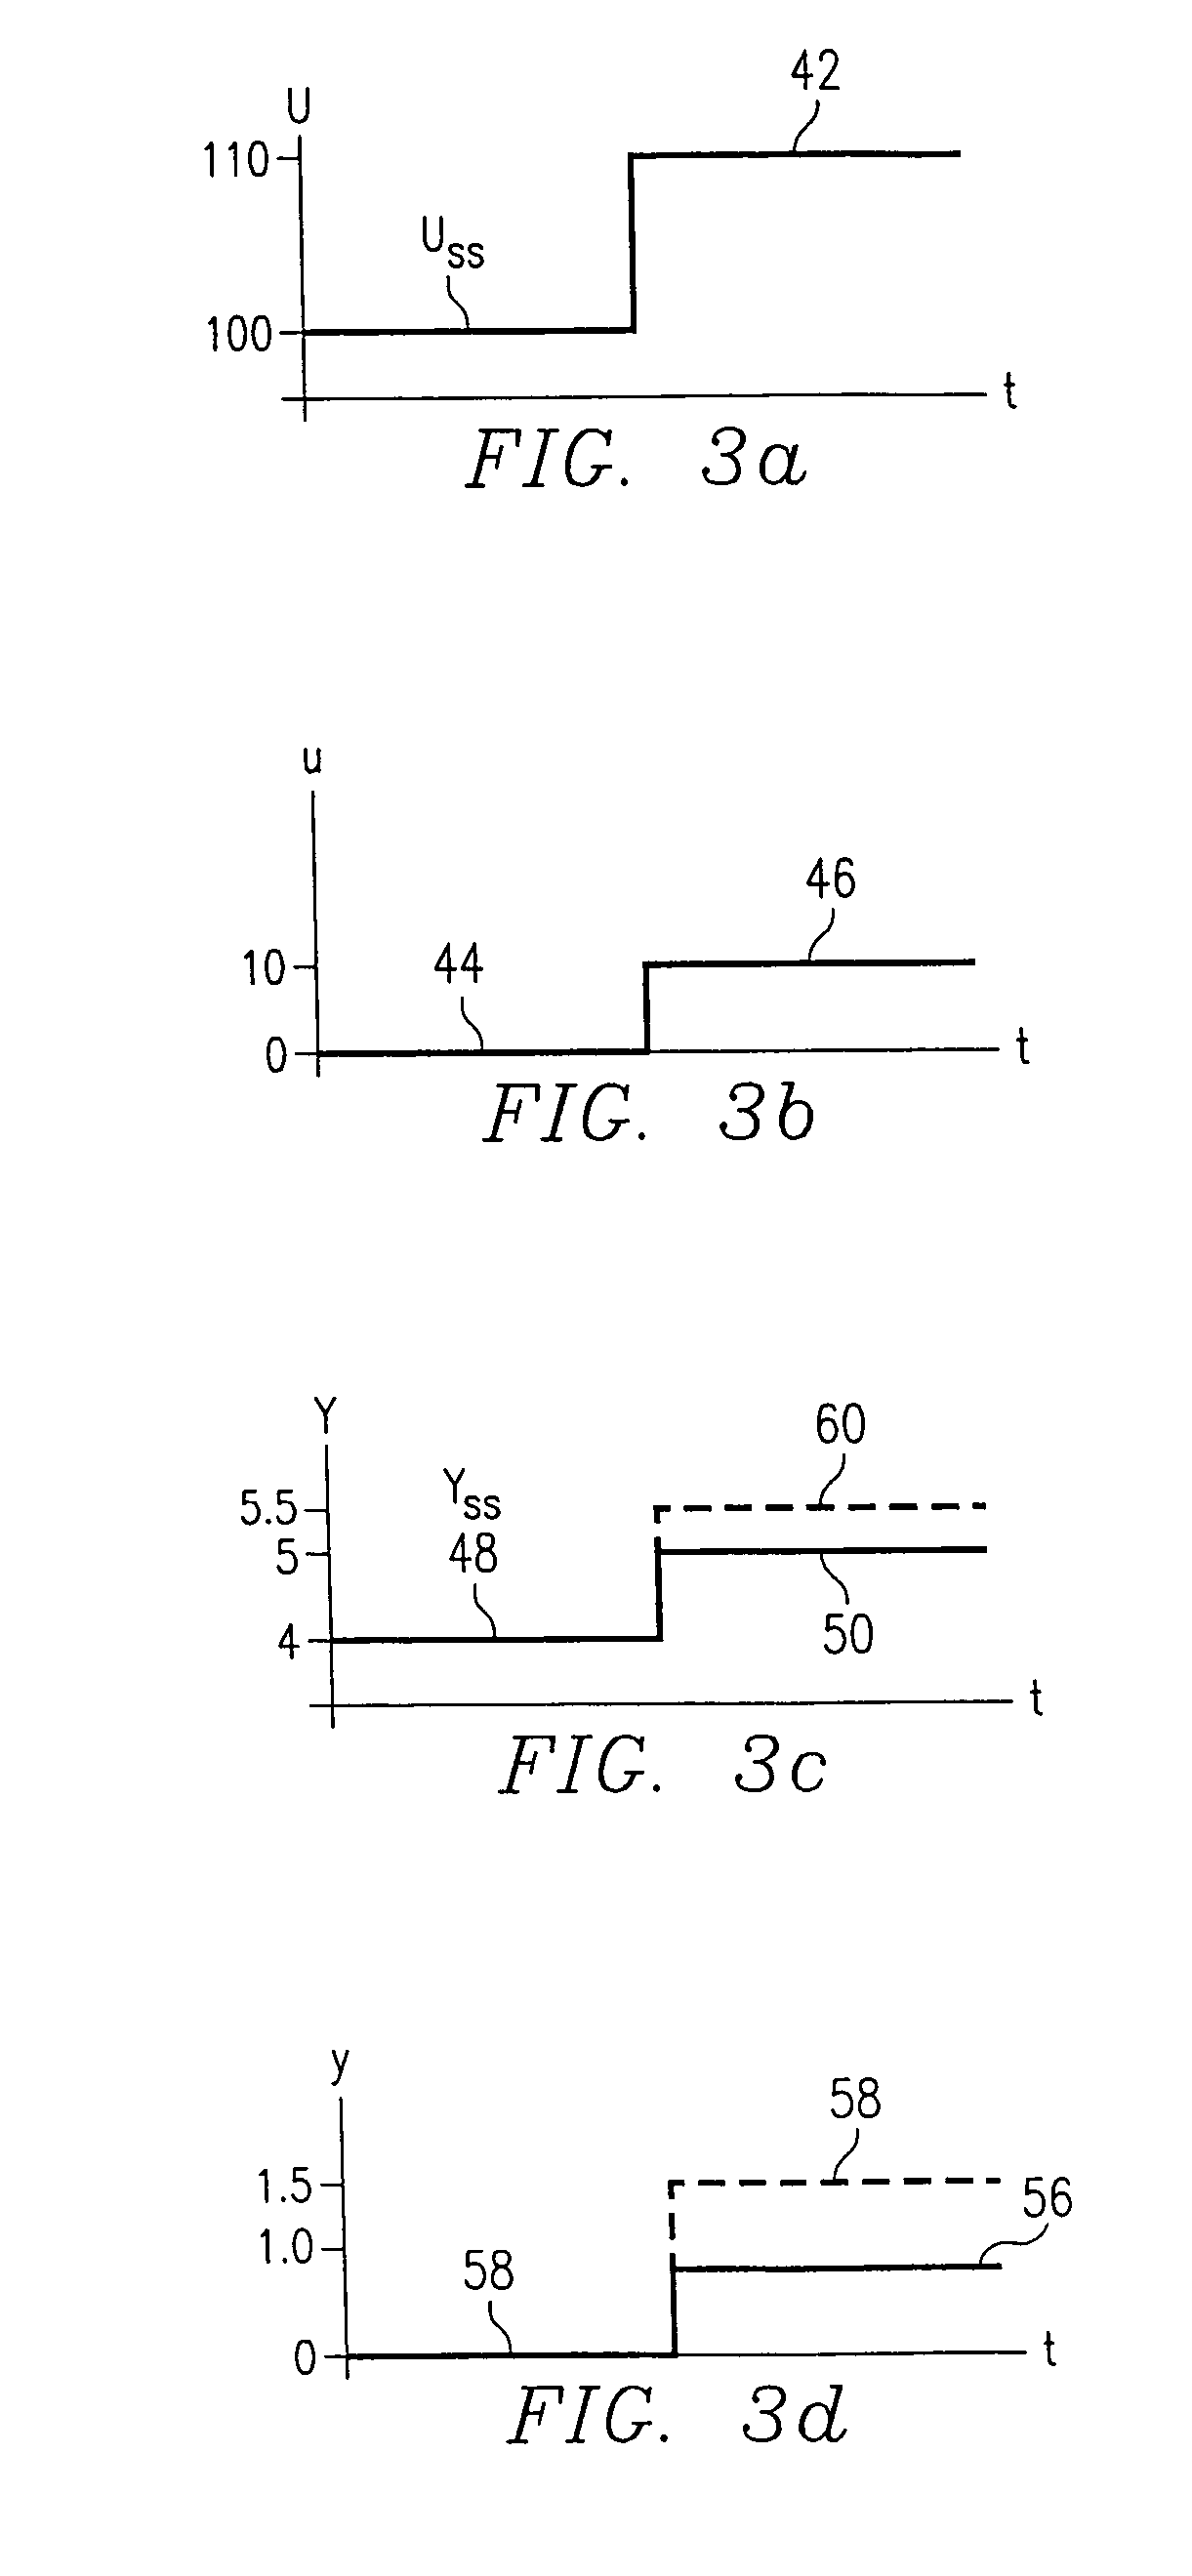 Method and apparatus for minimizing error in dynamic and steady-state processes for prediction, control, and optimization